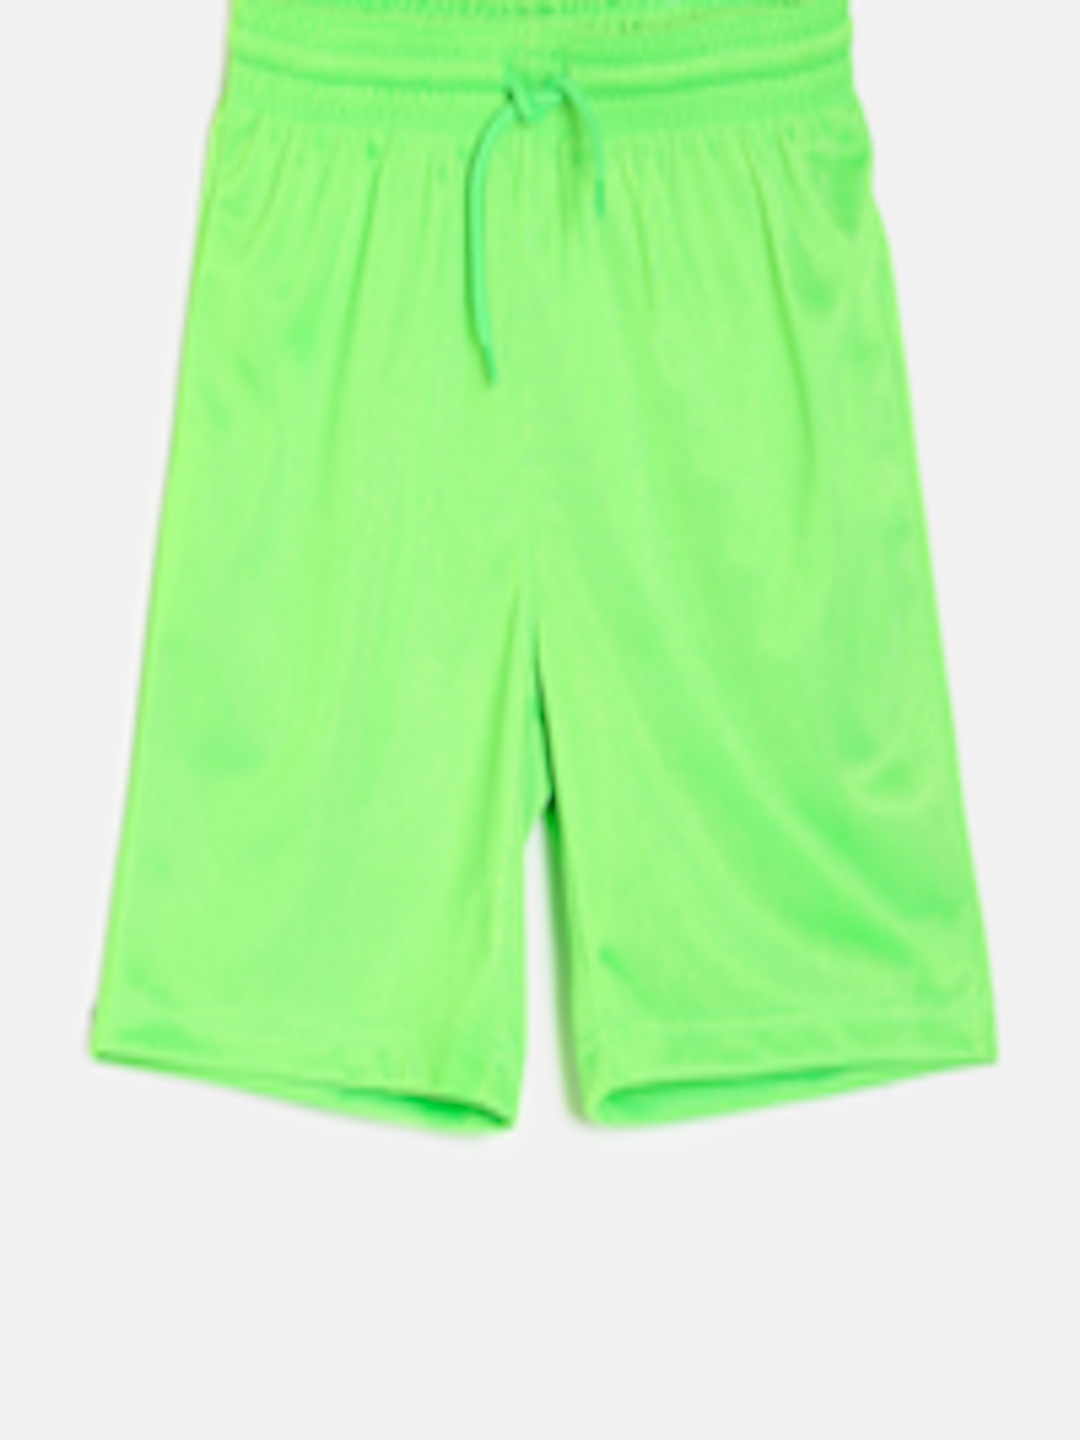 Buy The Childrens Place Boys Green Solid Regular Fit Regular Shorts ...